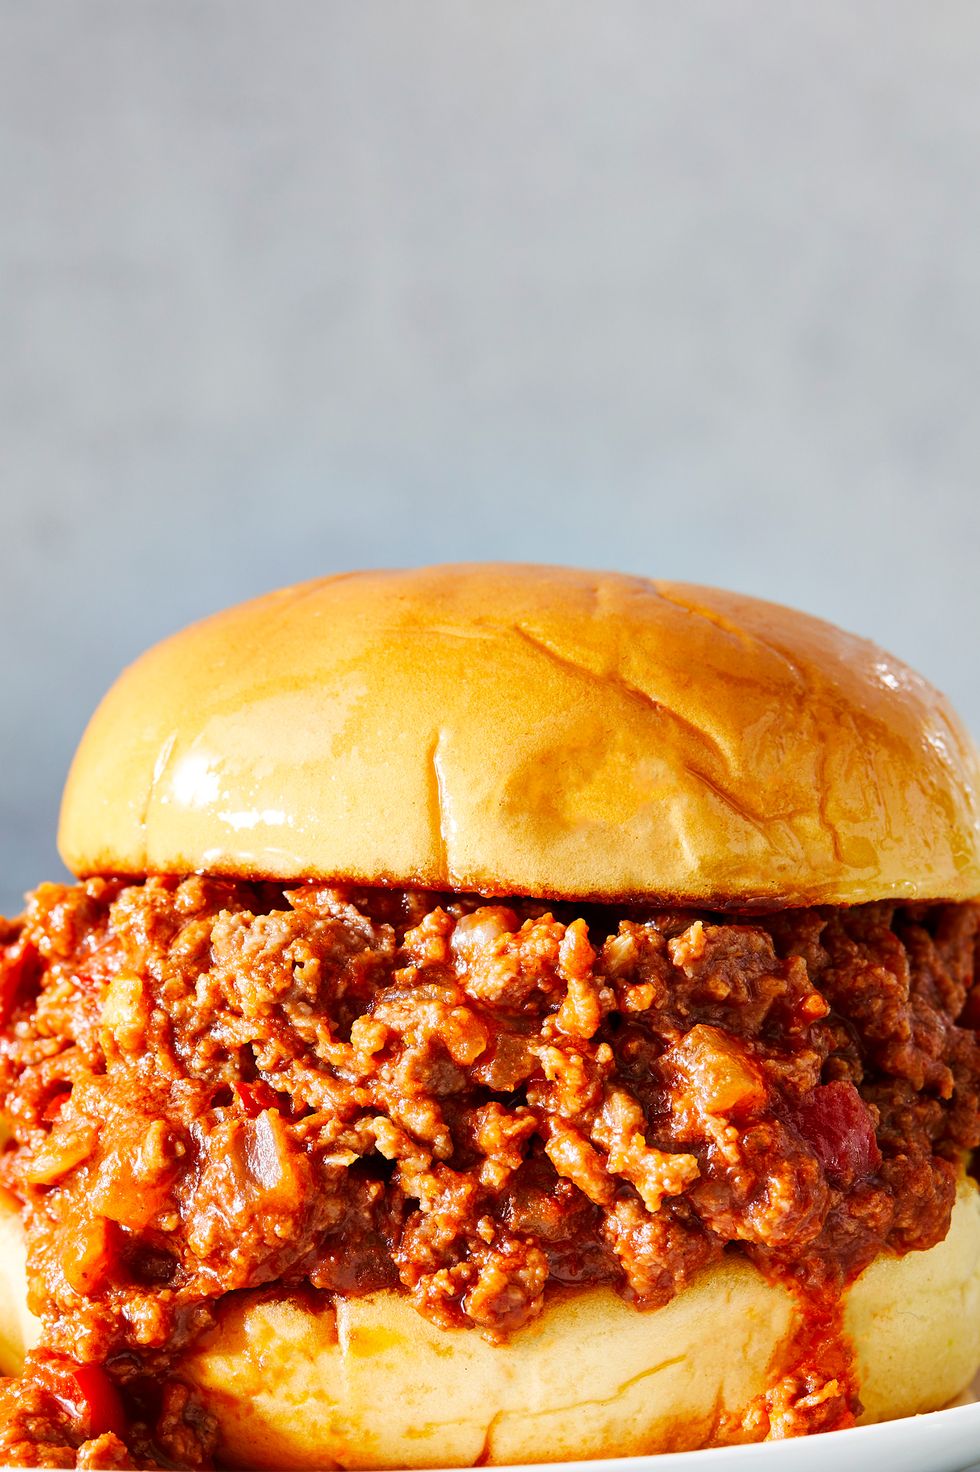 sloppy joes served on a toasted bun with chips